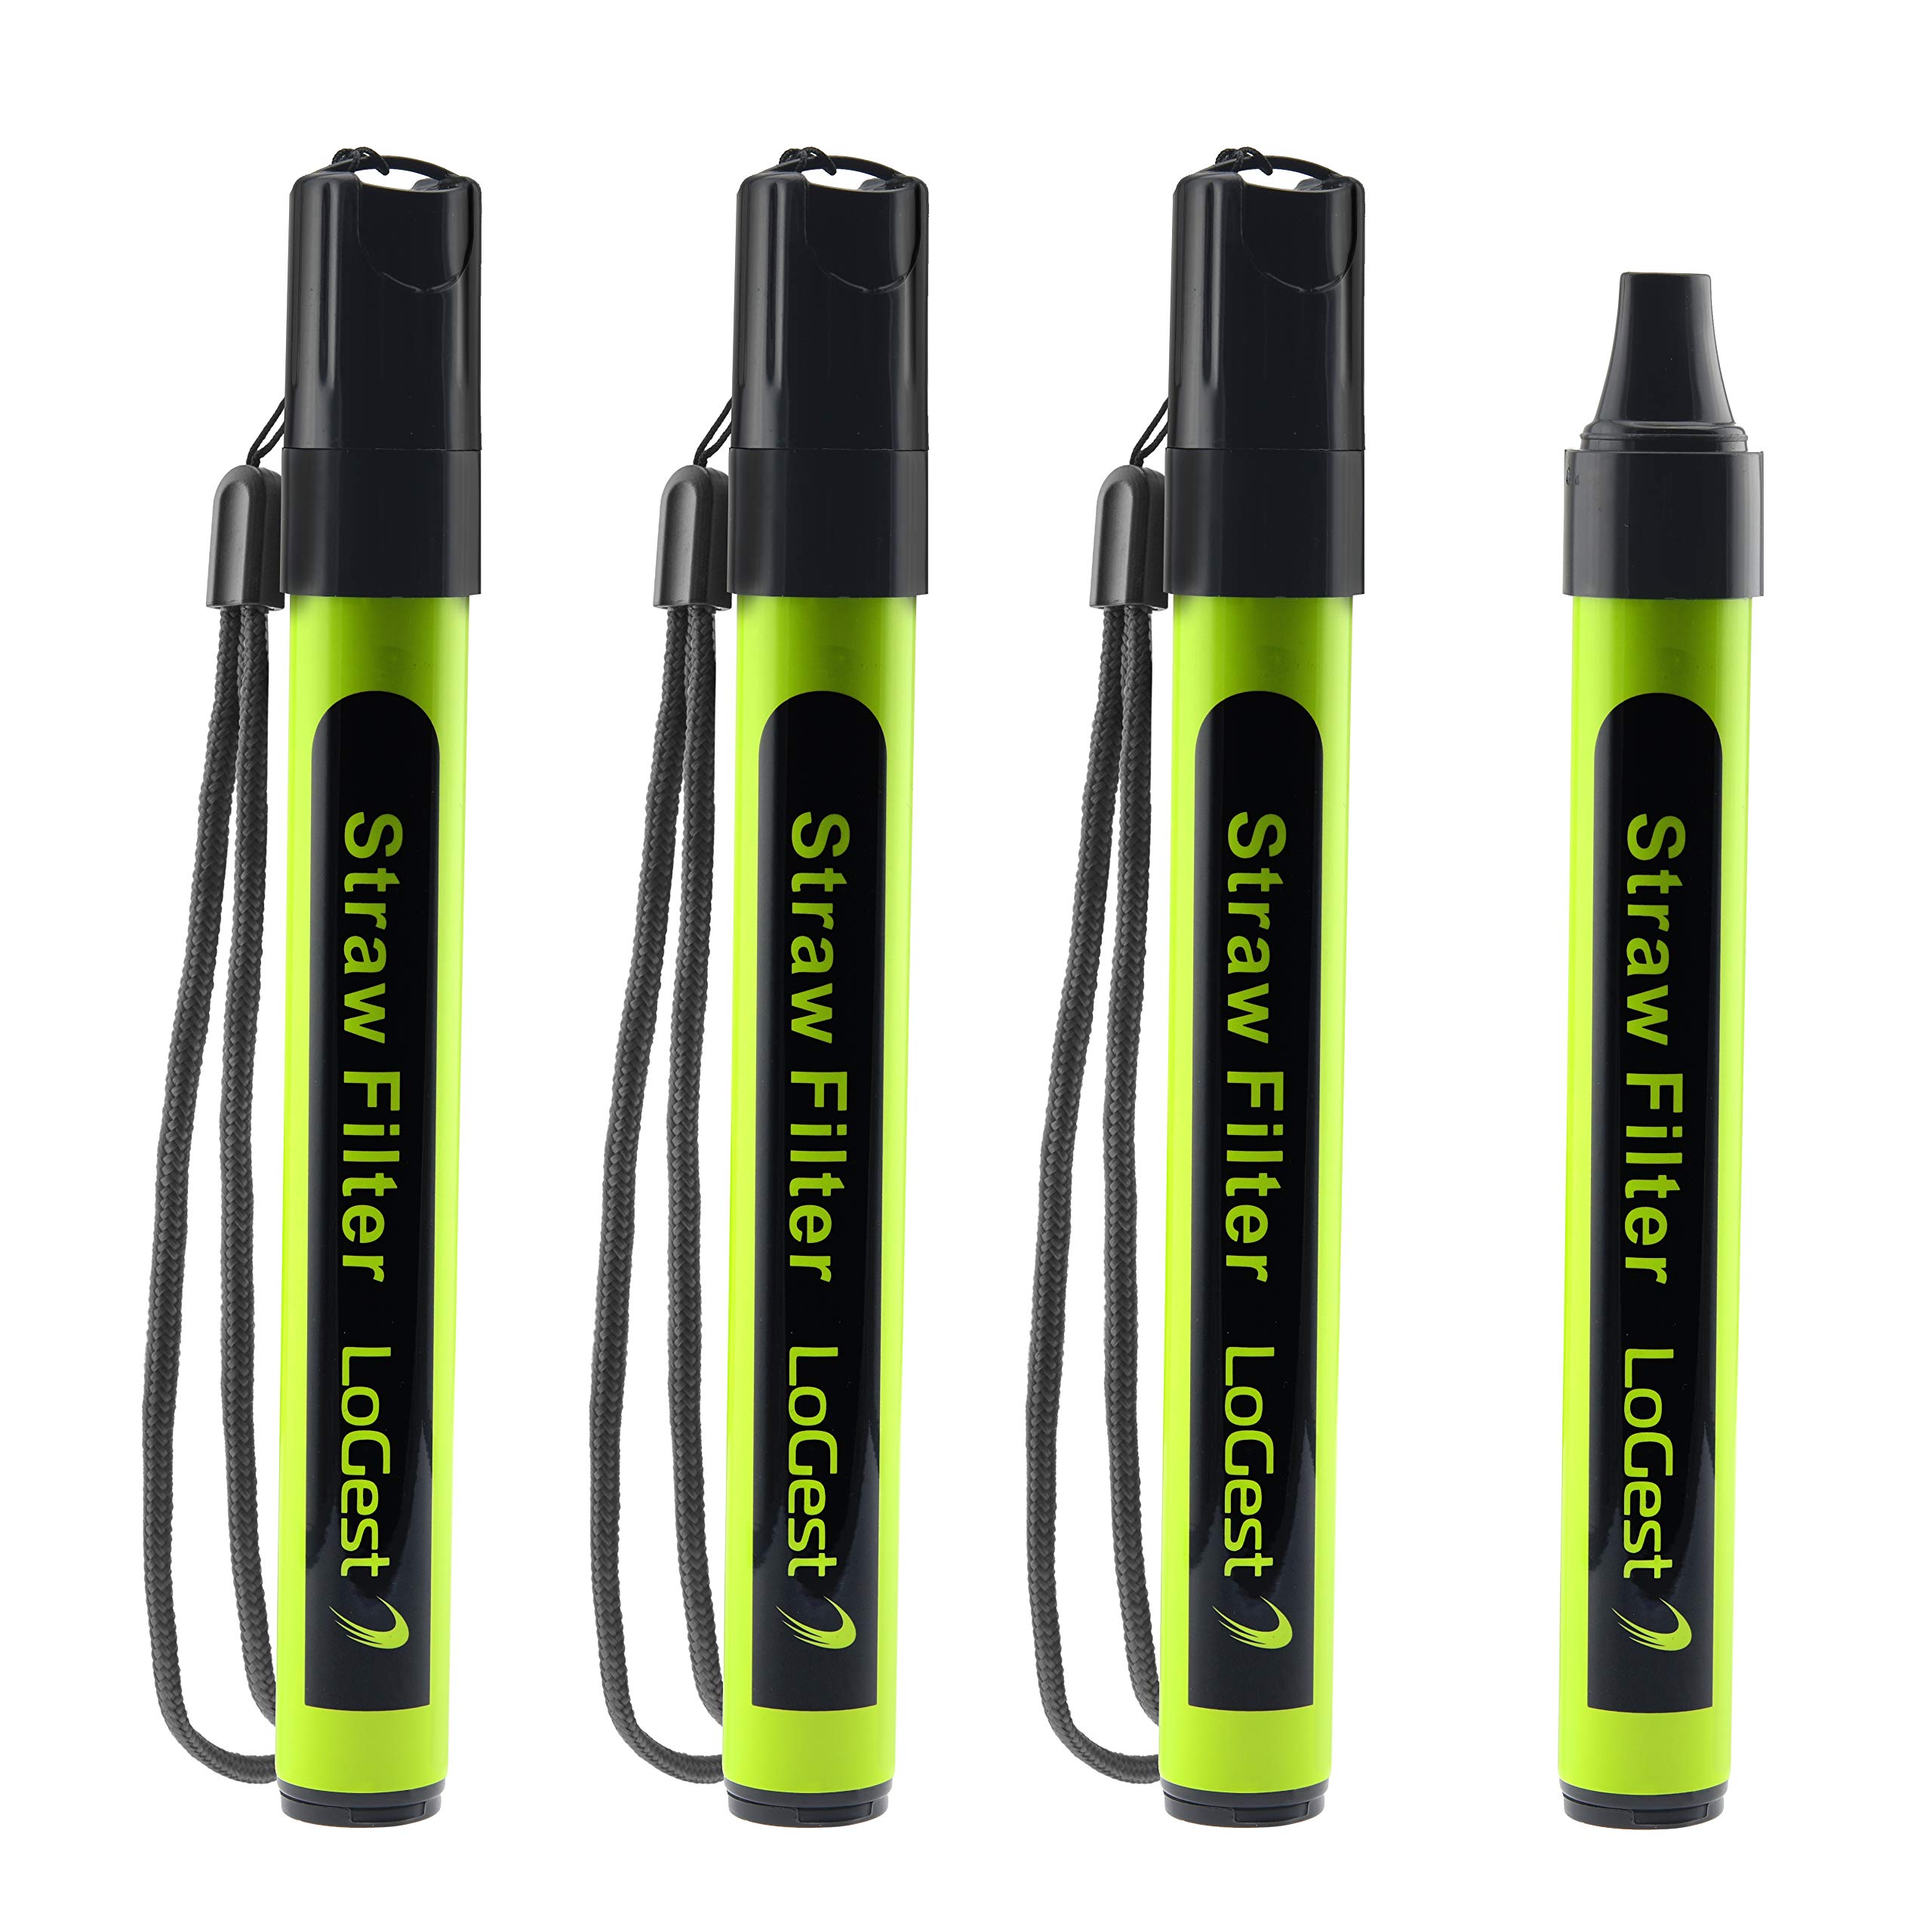 Portable Water Filter Straw Purifier for Survival Emergency